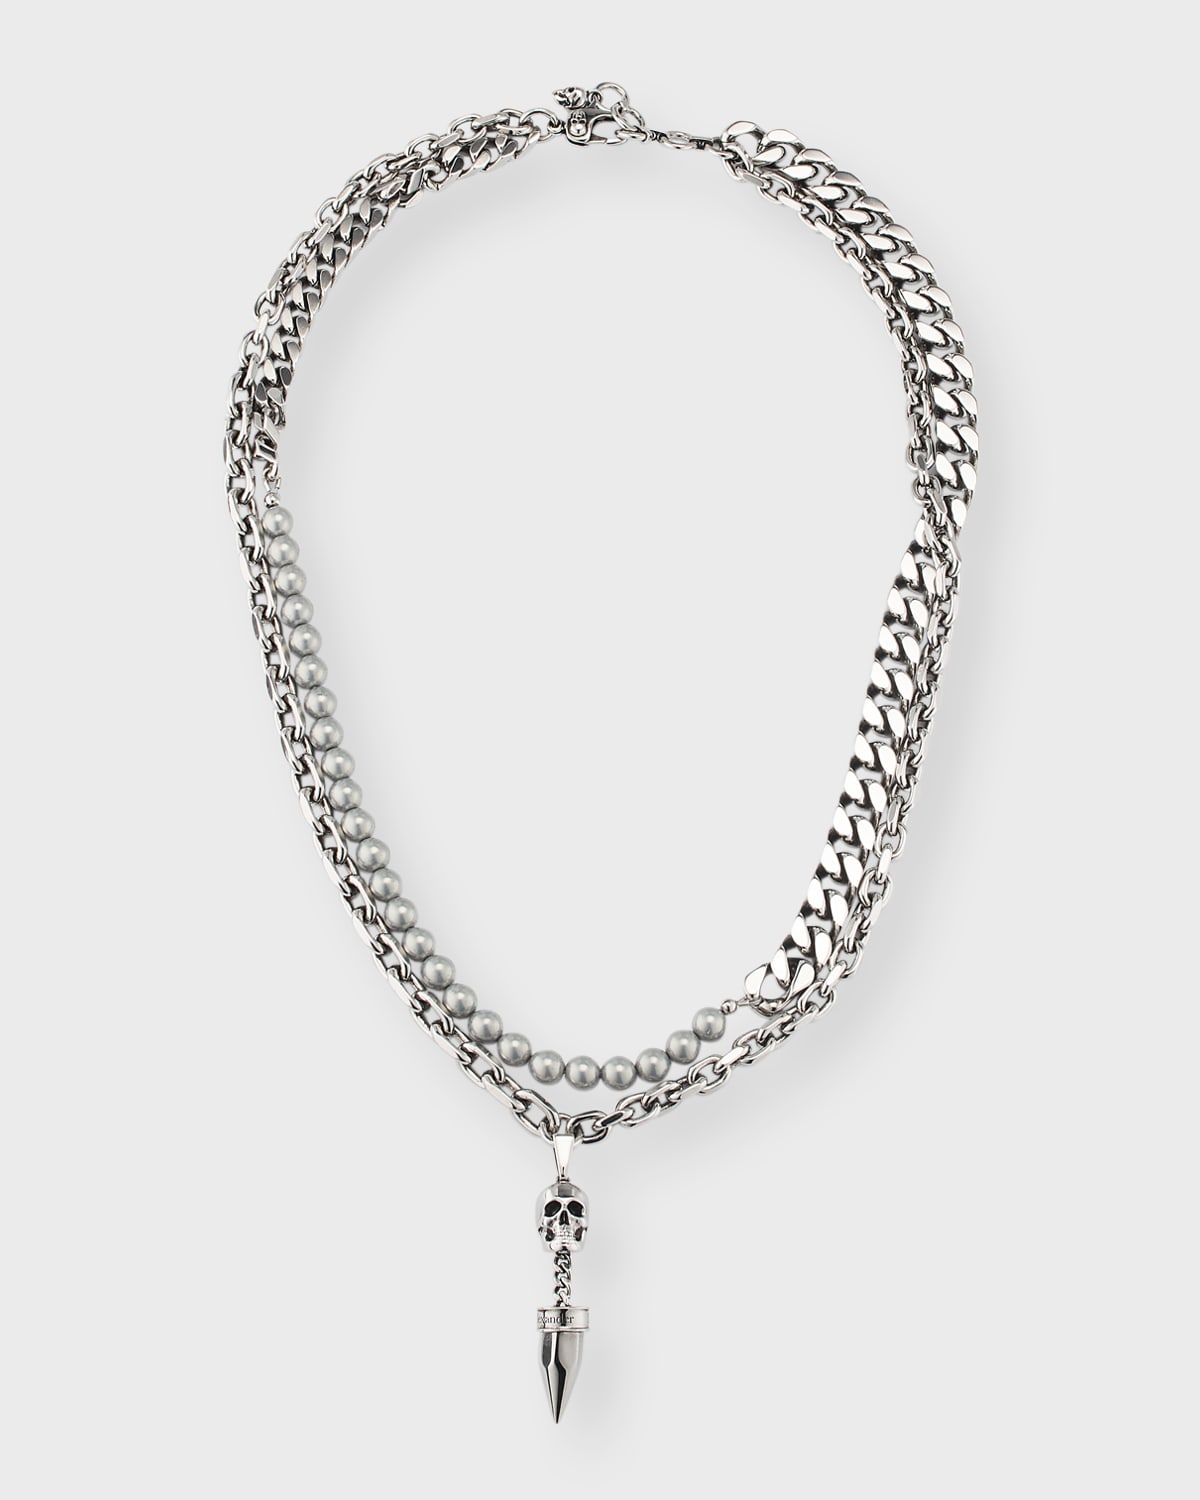 ALEXANDER MCQUEEN MEN'S FAUX PEARL AND SKULL STUD DOUBLE-CHAIN NECKLACE